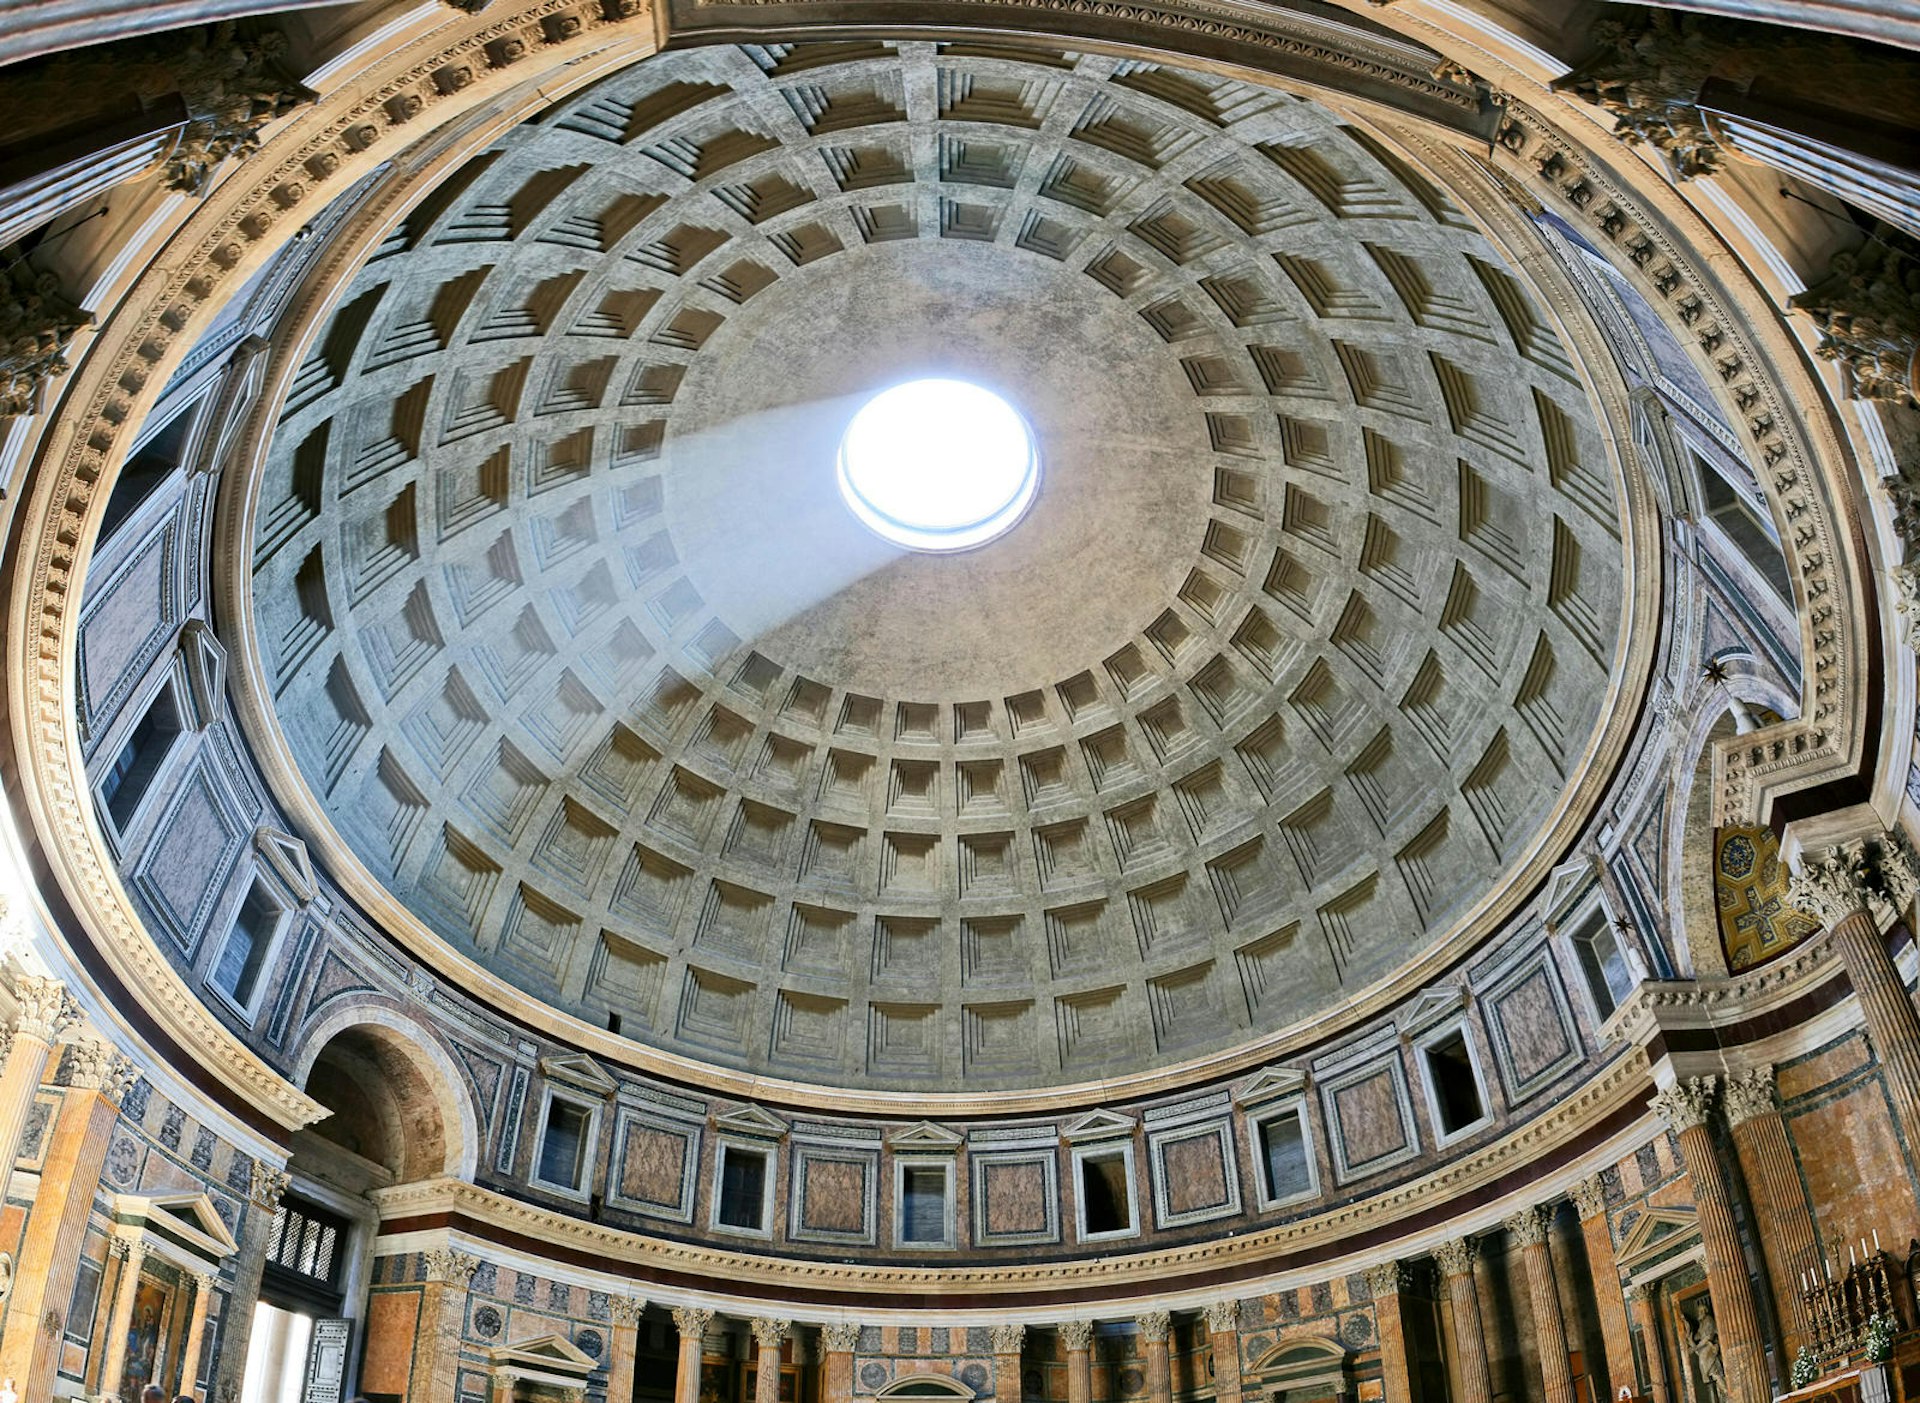 A beam of light breaks through the cirular hole atop the Pantheon's dome and cuts down into the building's interior